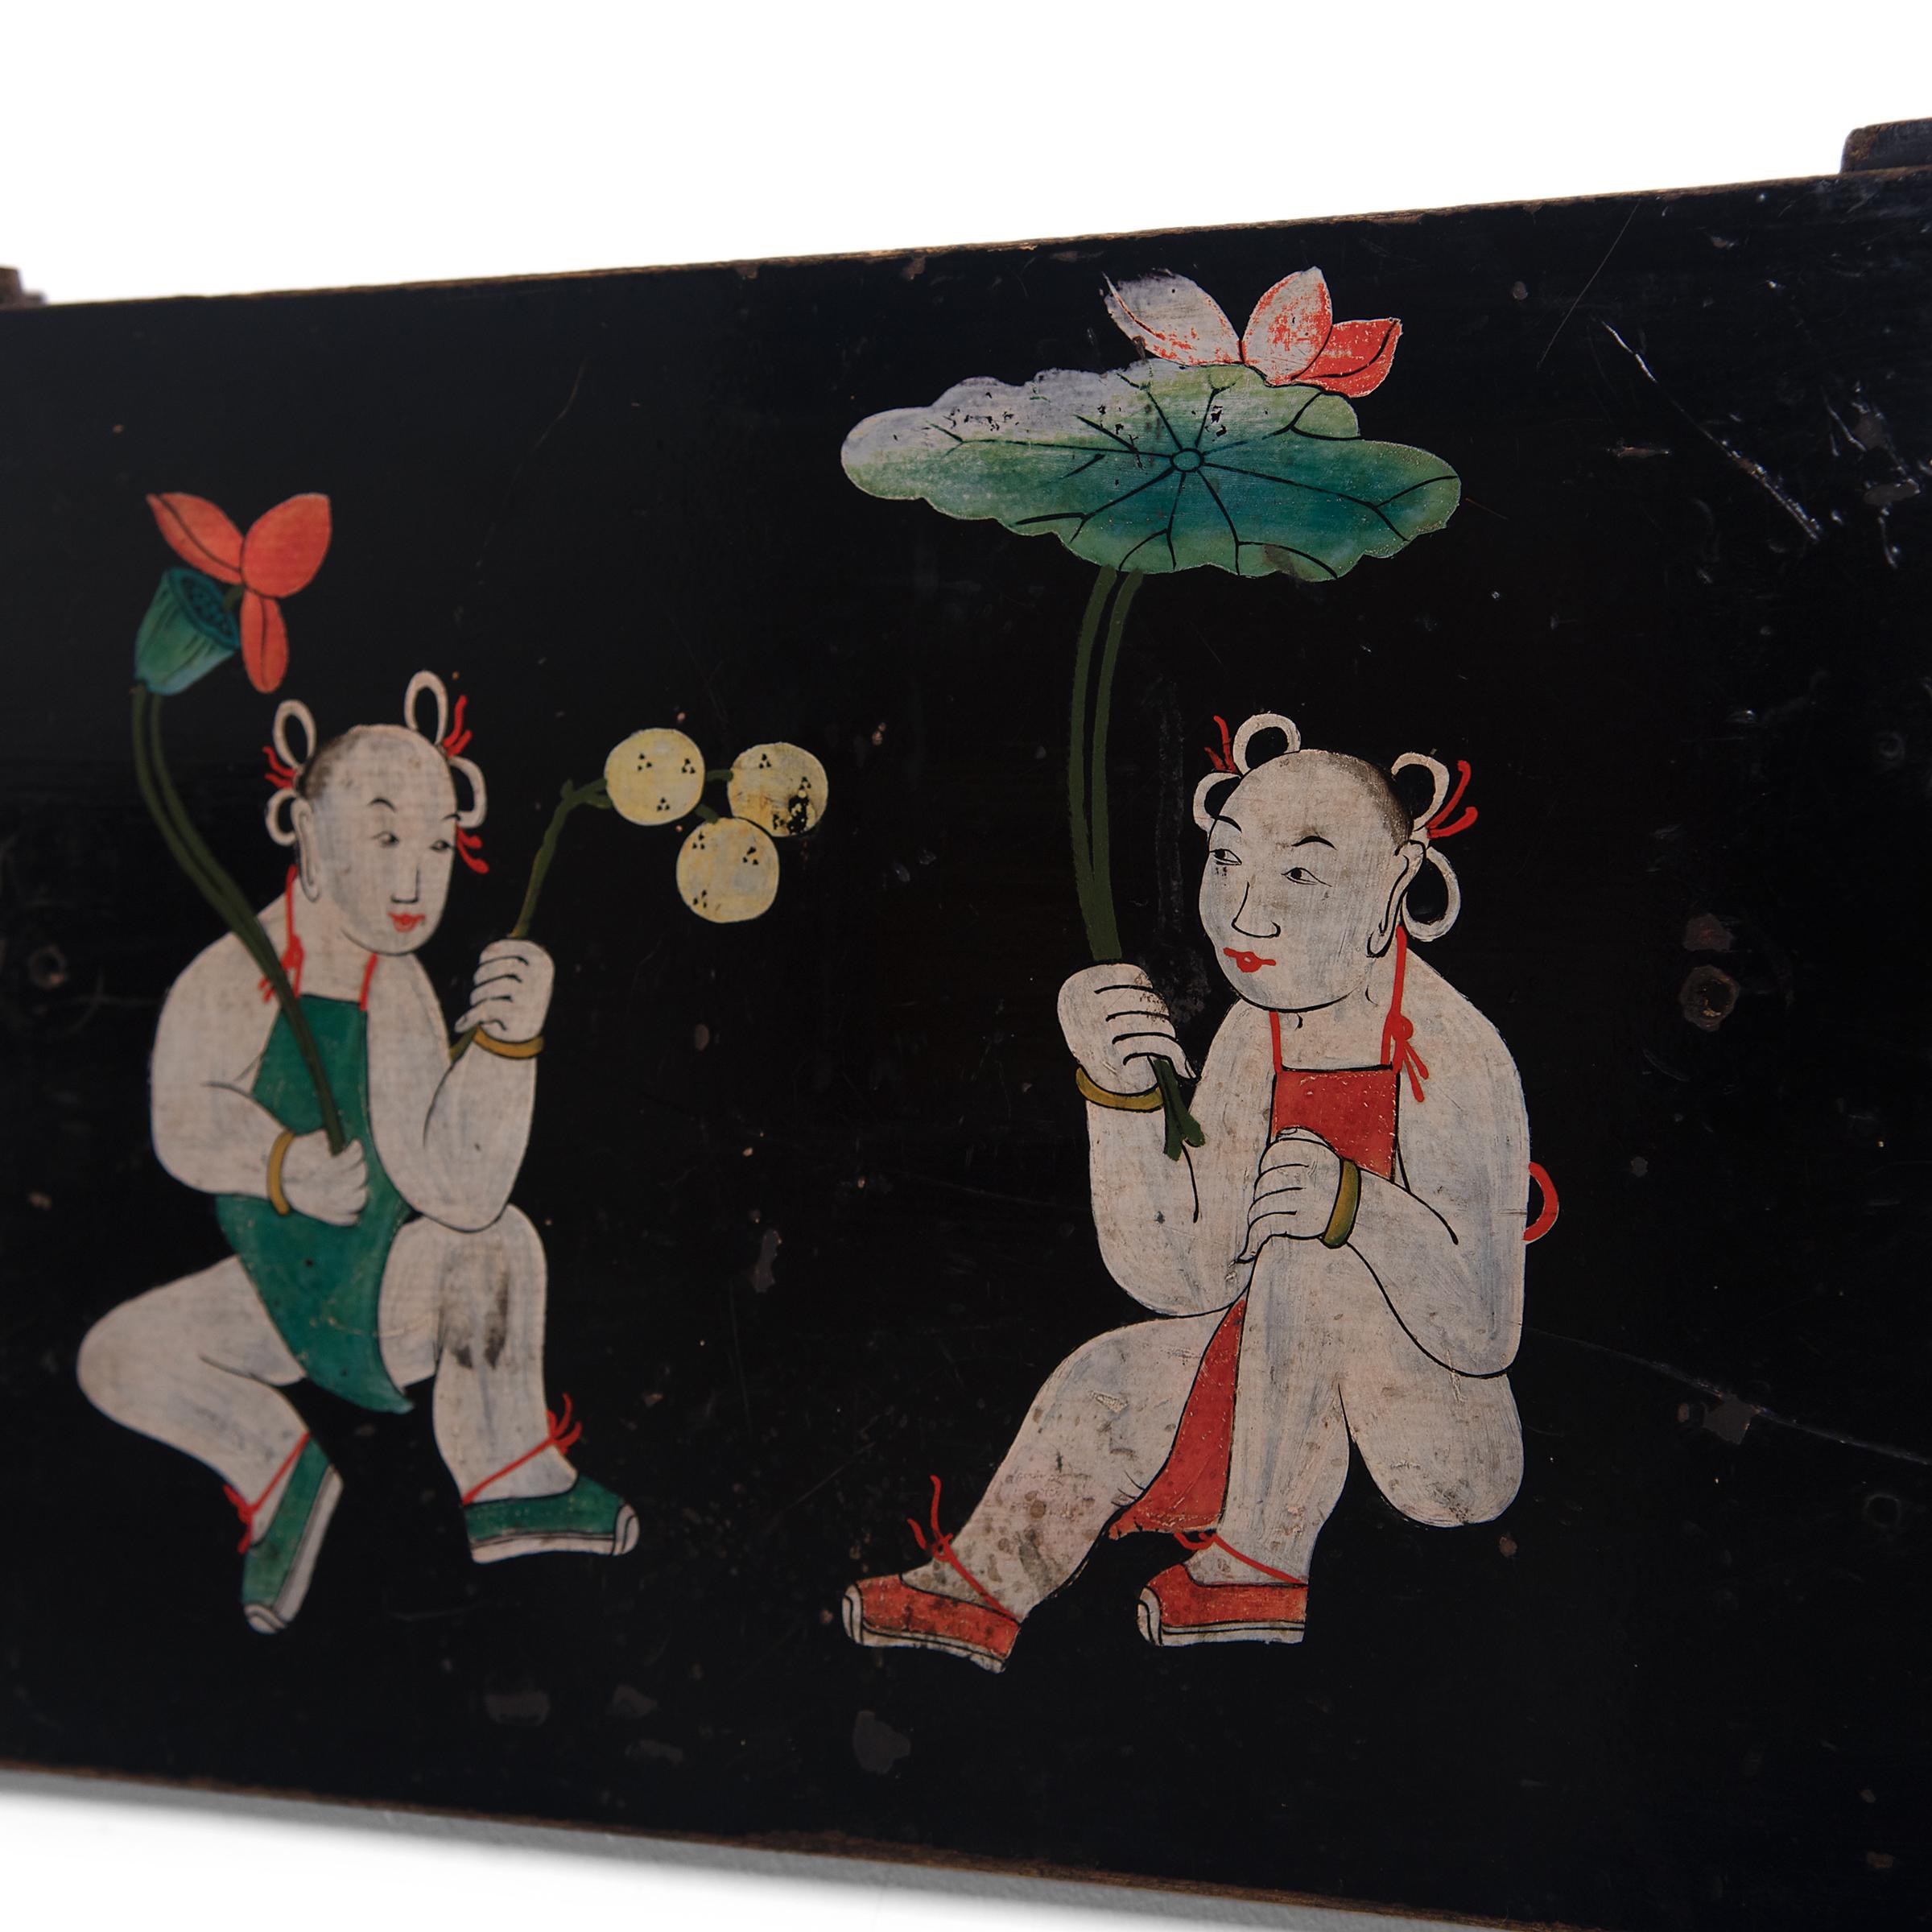 This folk hand-painted panel, laden with meaning, was originally an interior painted panel of a large storage cabinet. The panel is painted with a scene of two young boys in traditional aprons, a motif commonly referred to as 